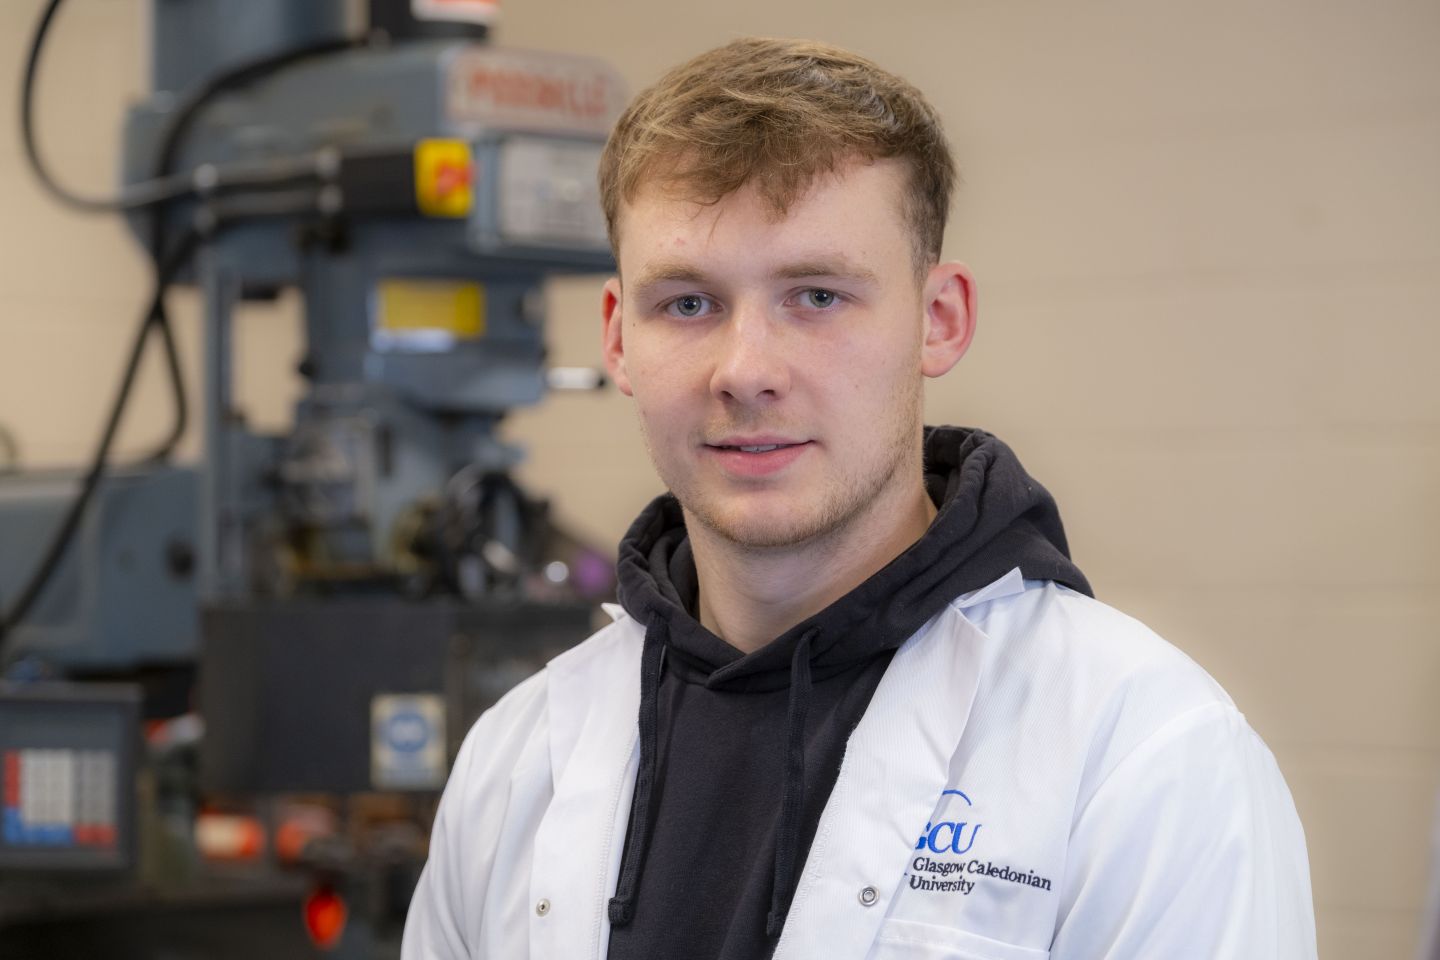 Mechanical Systems Engineering student Andrew Leggate, photographed on Glasgow campus in October 2021.